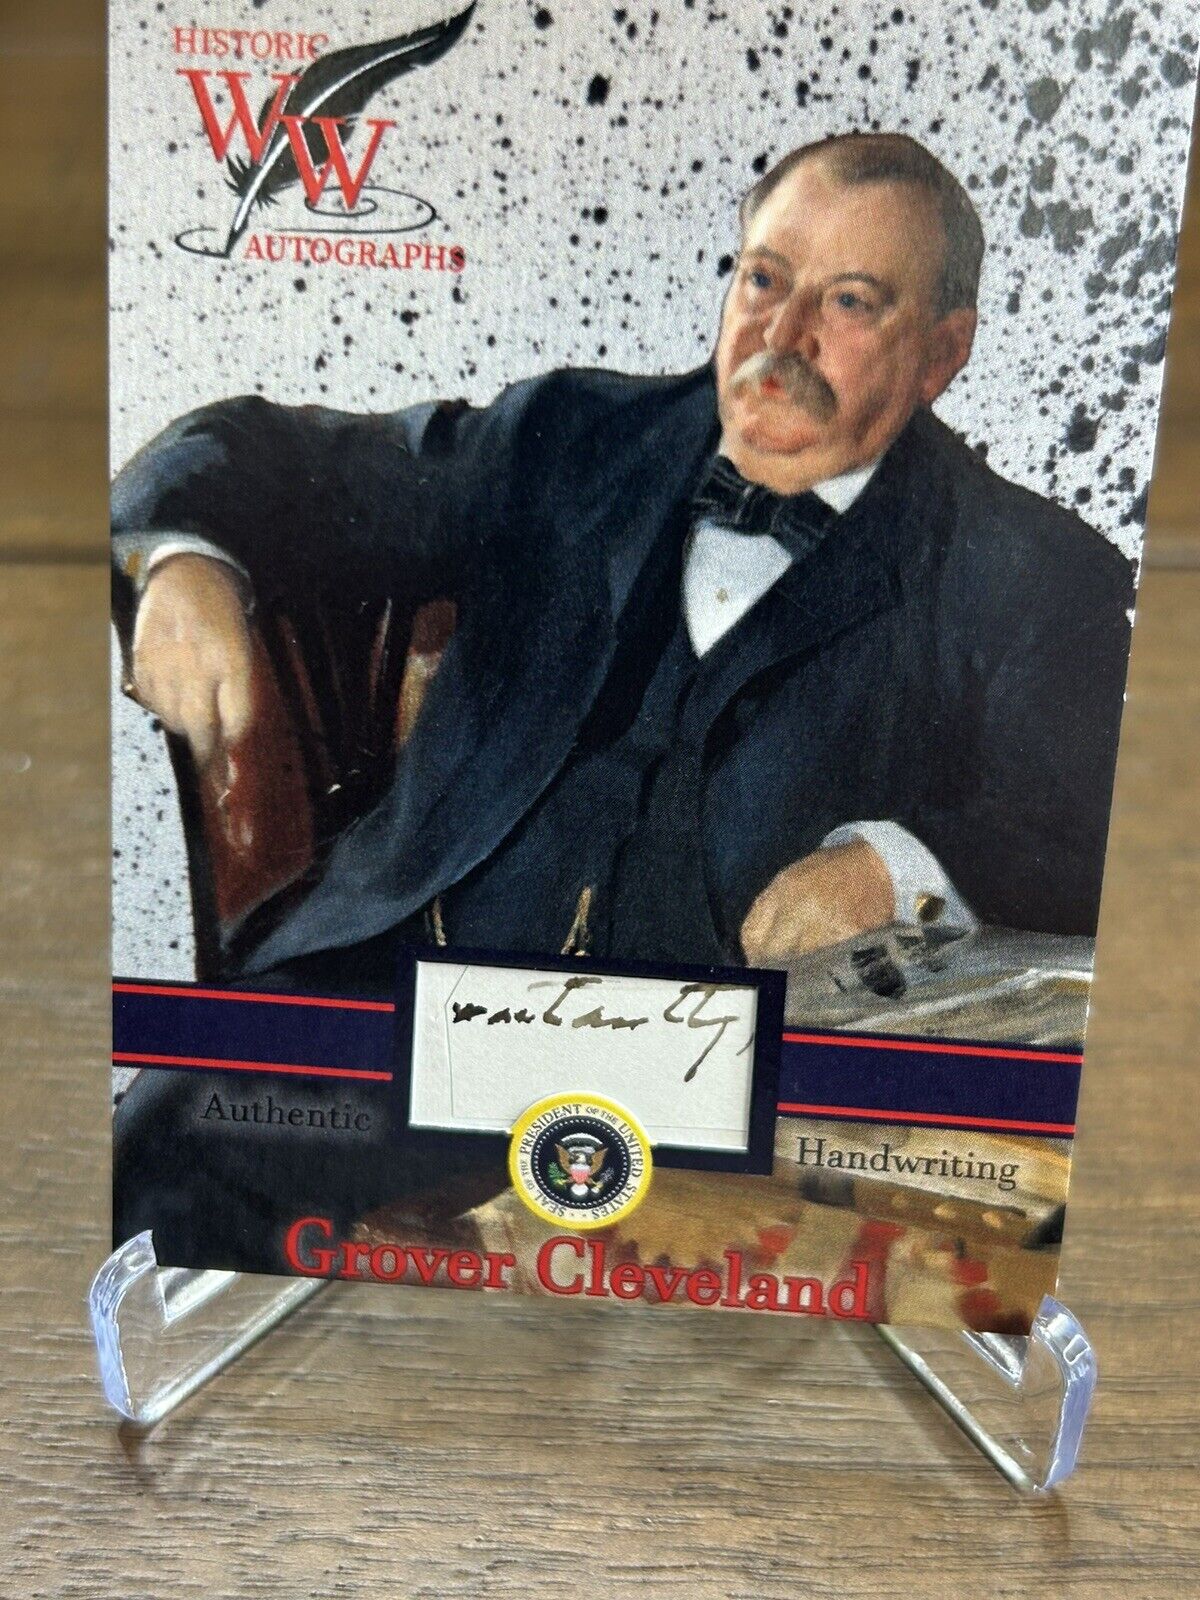 2021 Historic Autographs Written Word POTUS Handwriting Relic Grover Cleveland